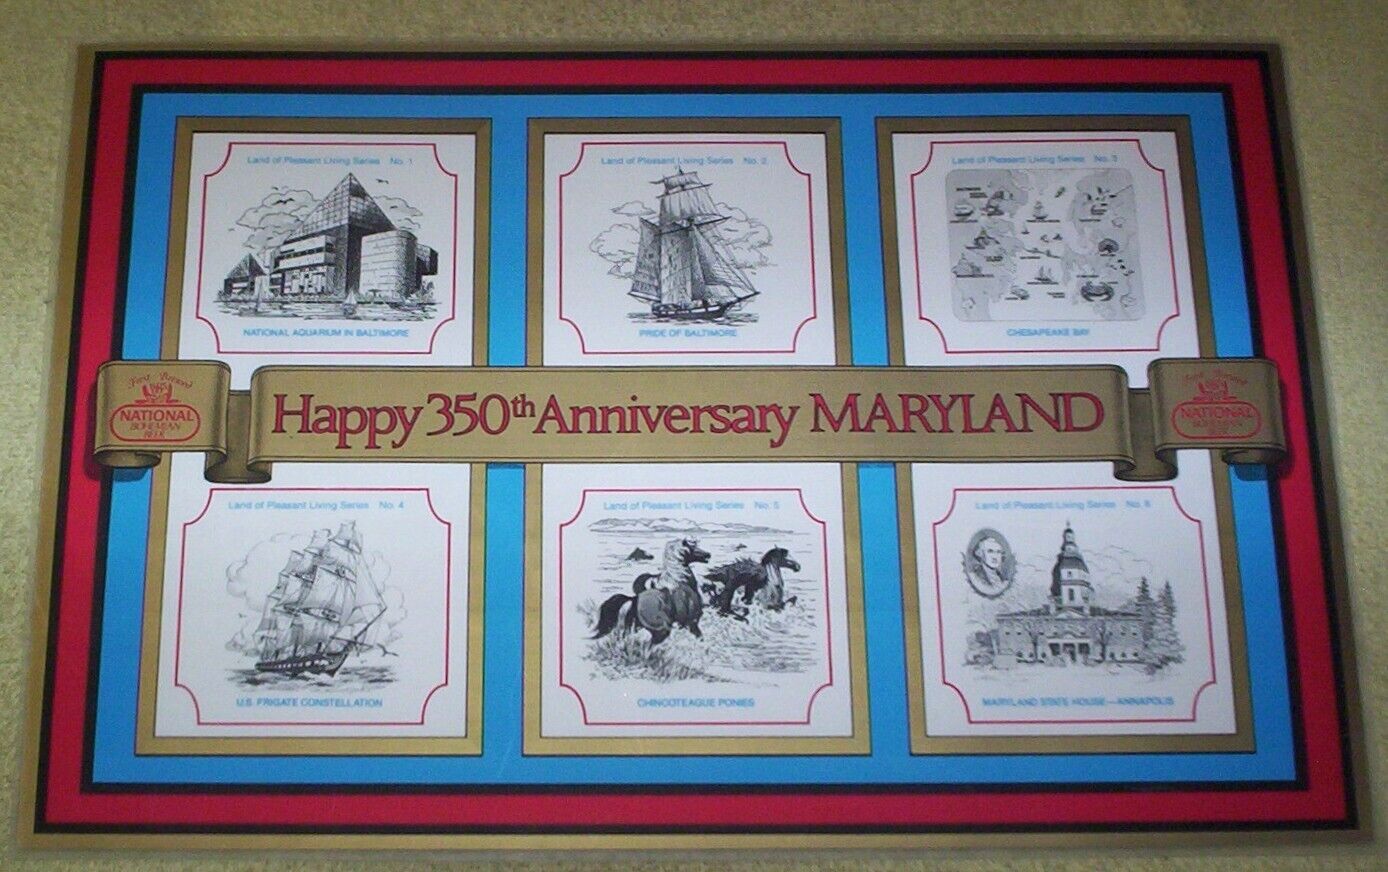 1984 G. HEILEMAN BREWEING NATIONAL BOHEMIAN BEER PLACEMAT 350TH MARYLAND ANNIV.